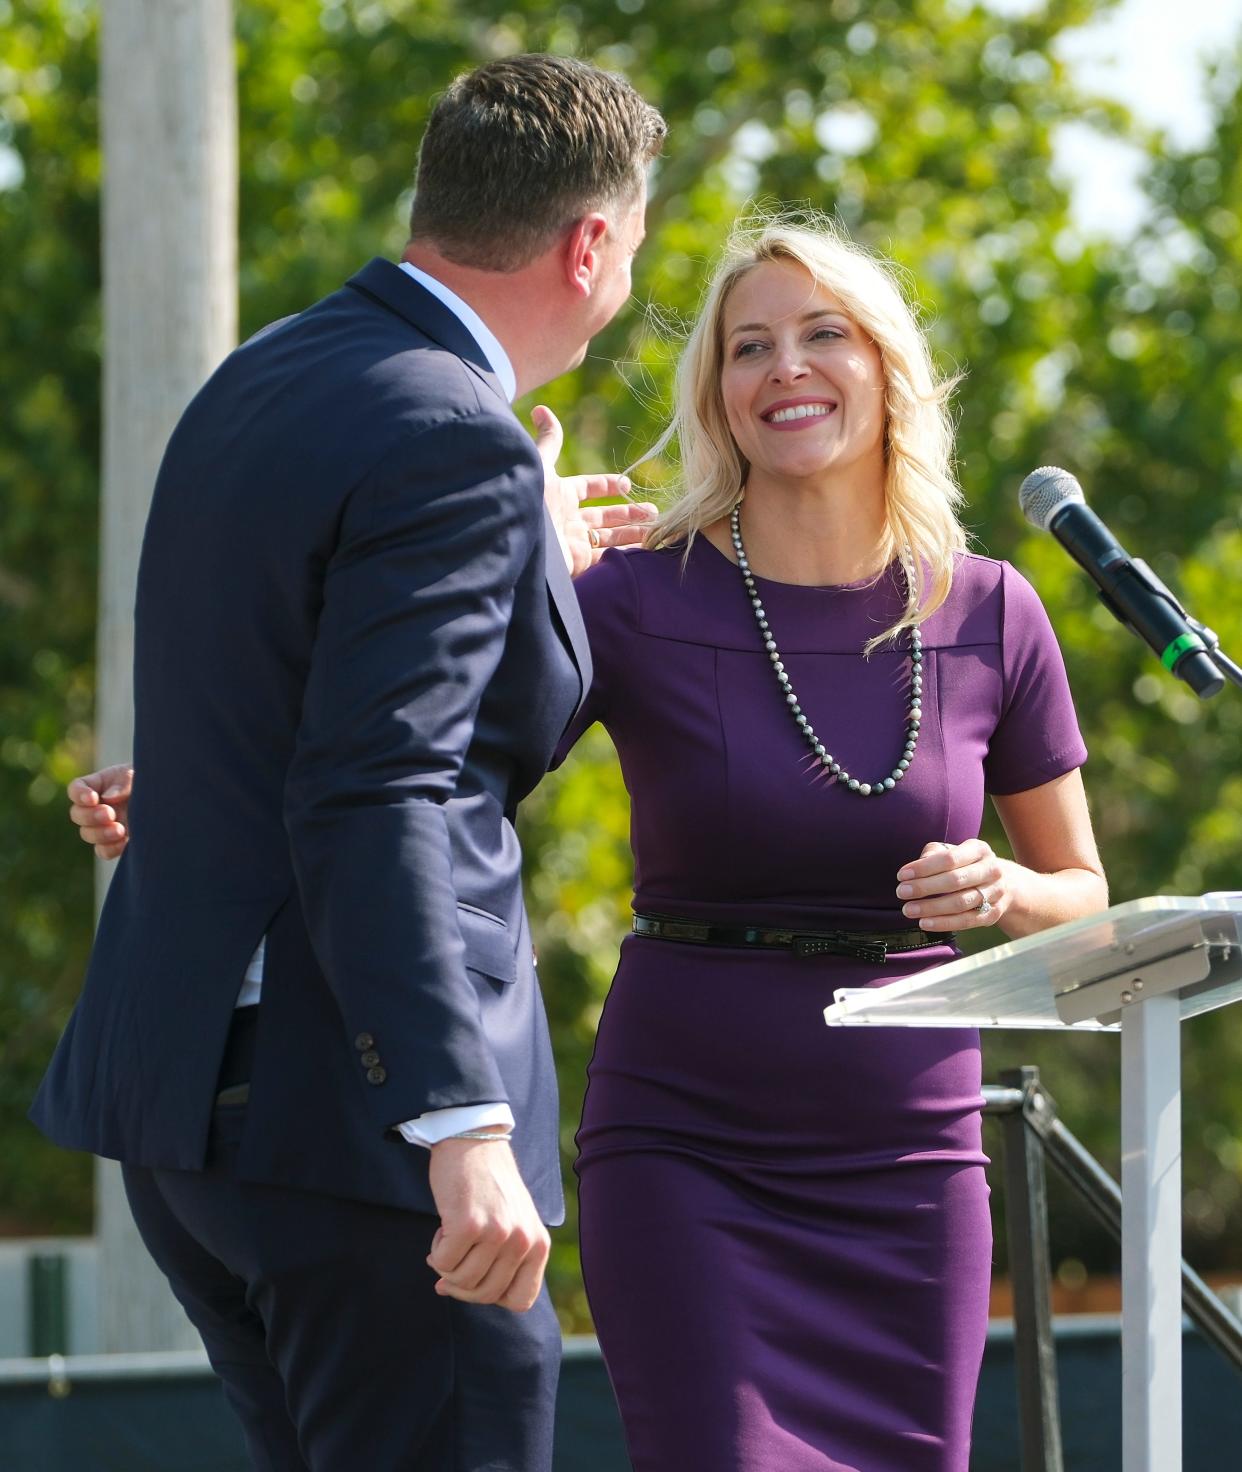 Oklahoma City Mayor David Holt hugs Kim Garrett, founder and chief visionary officer for Palomar and emcee for the day, as he leaves the stage Sept. 13, 2022.